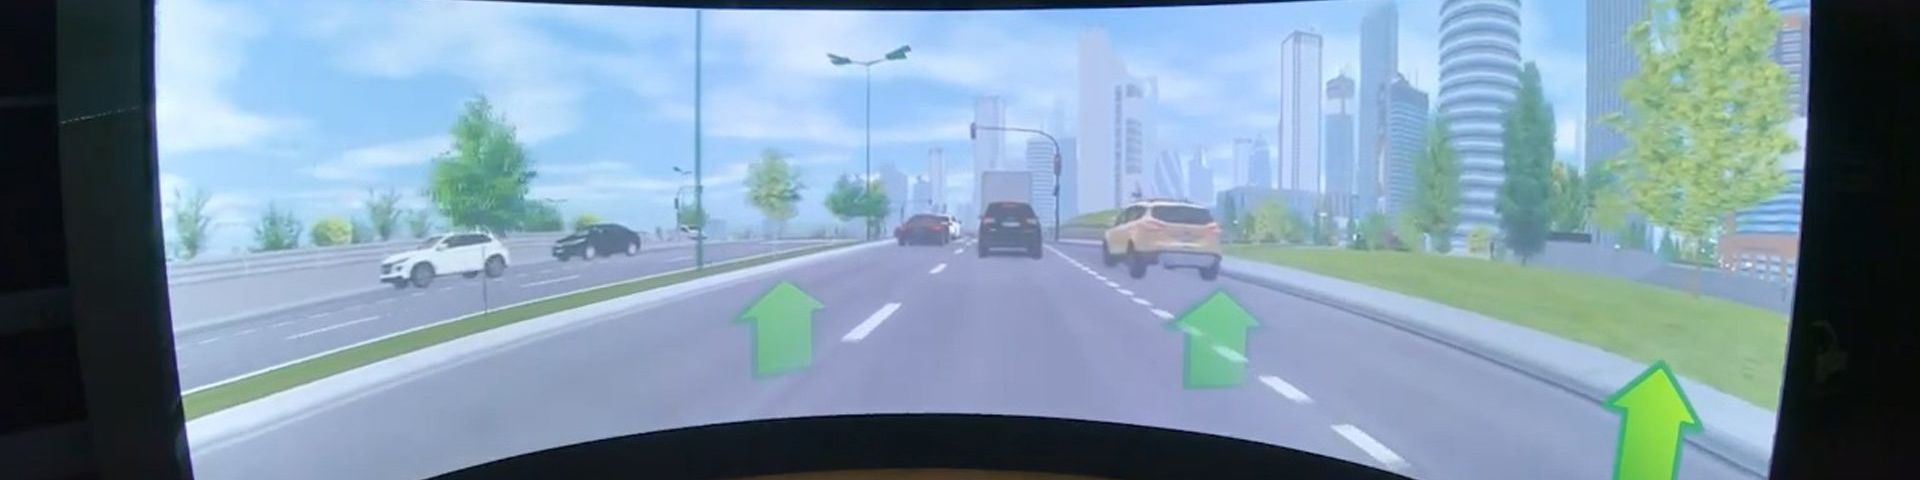 A wide screen depicting a highway with five cars and office buildings running alongside the road to the right.